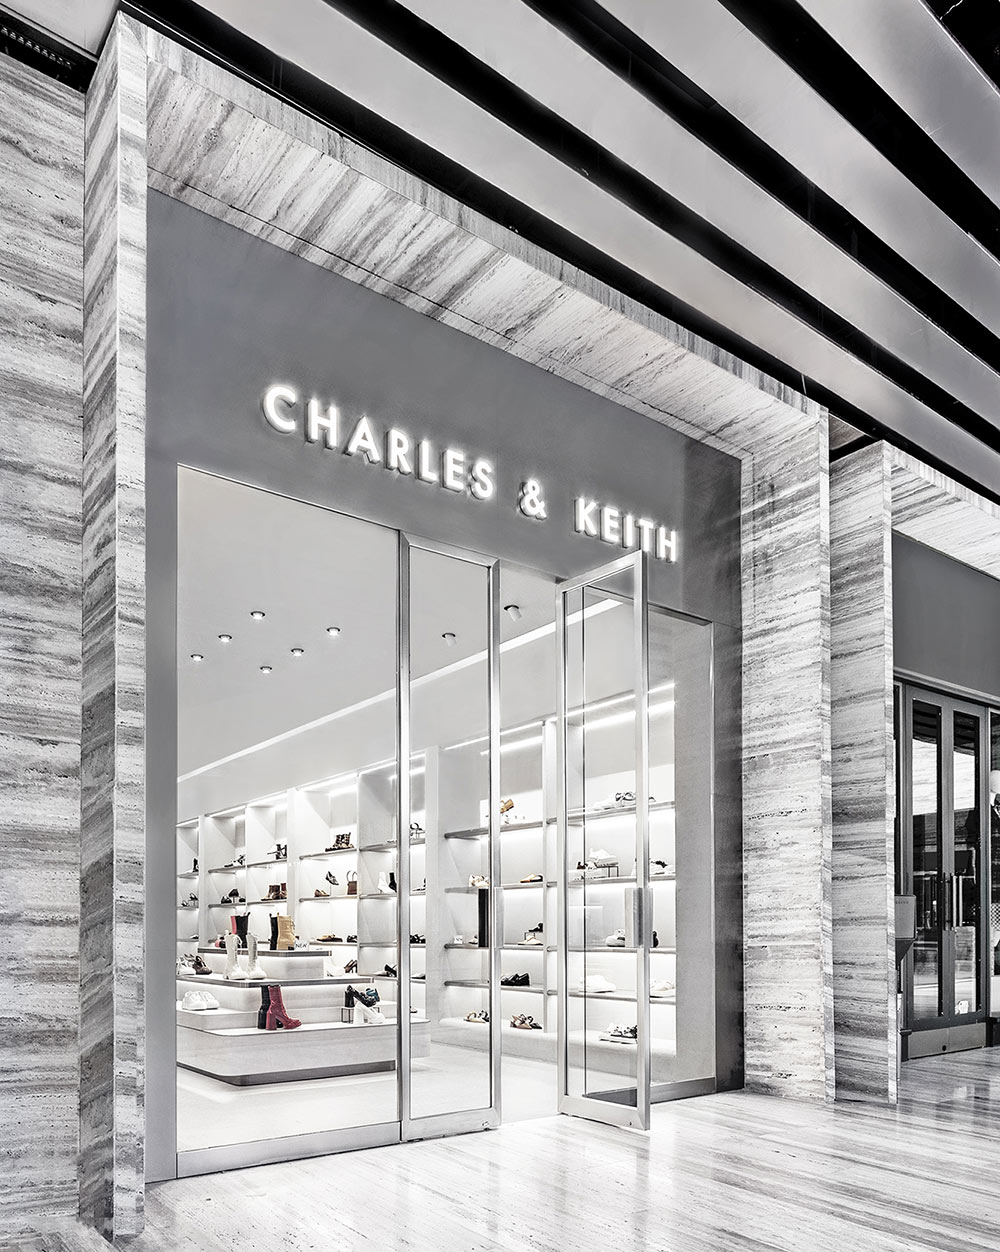 SINGAPORE-JUNE 17, 2018: Charles & Keith Store Outlet In Marina Square,  Singapore. This Shop Was Founded By Brothers Charles And Keith Wong. Stock  Photo, Picture and Royalty Free Image. Image 104687055.